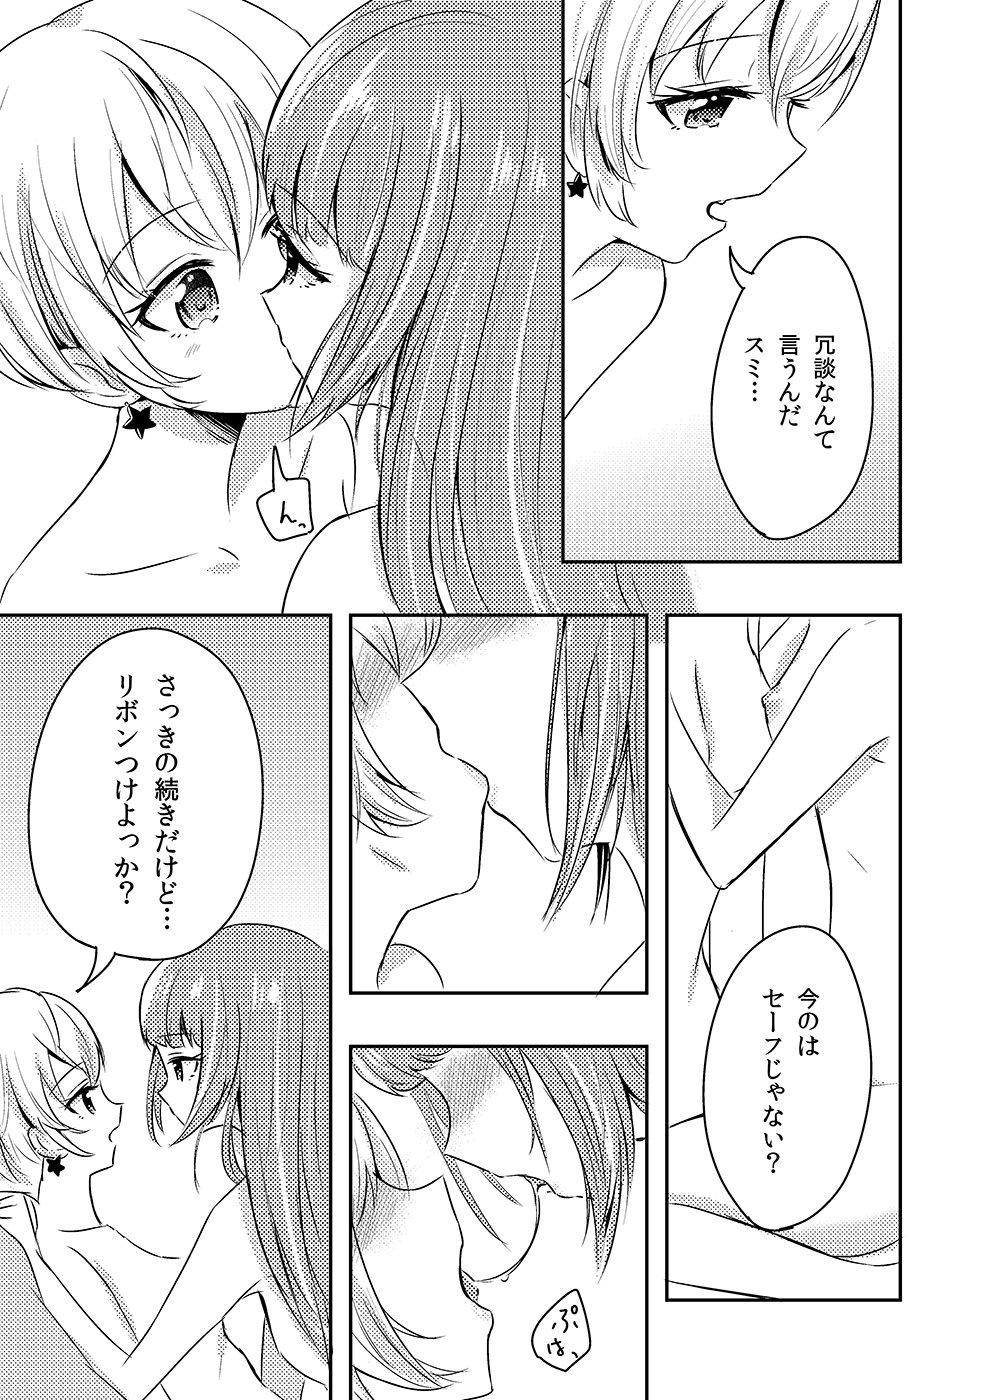 Who contributed to loveless sex joint two years ago! Yuusumi manga. 3